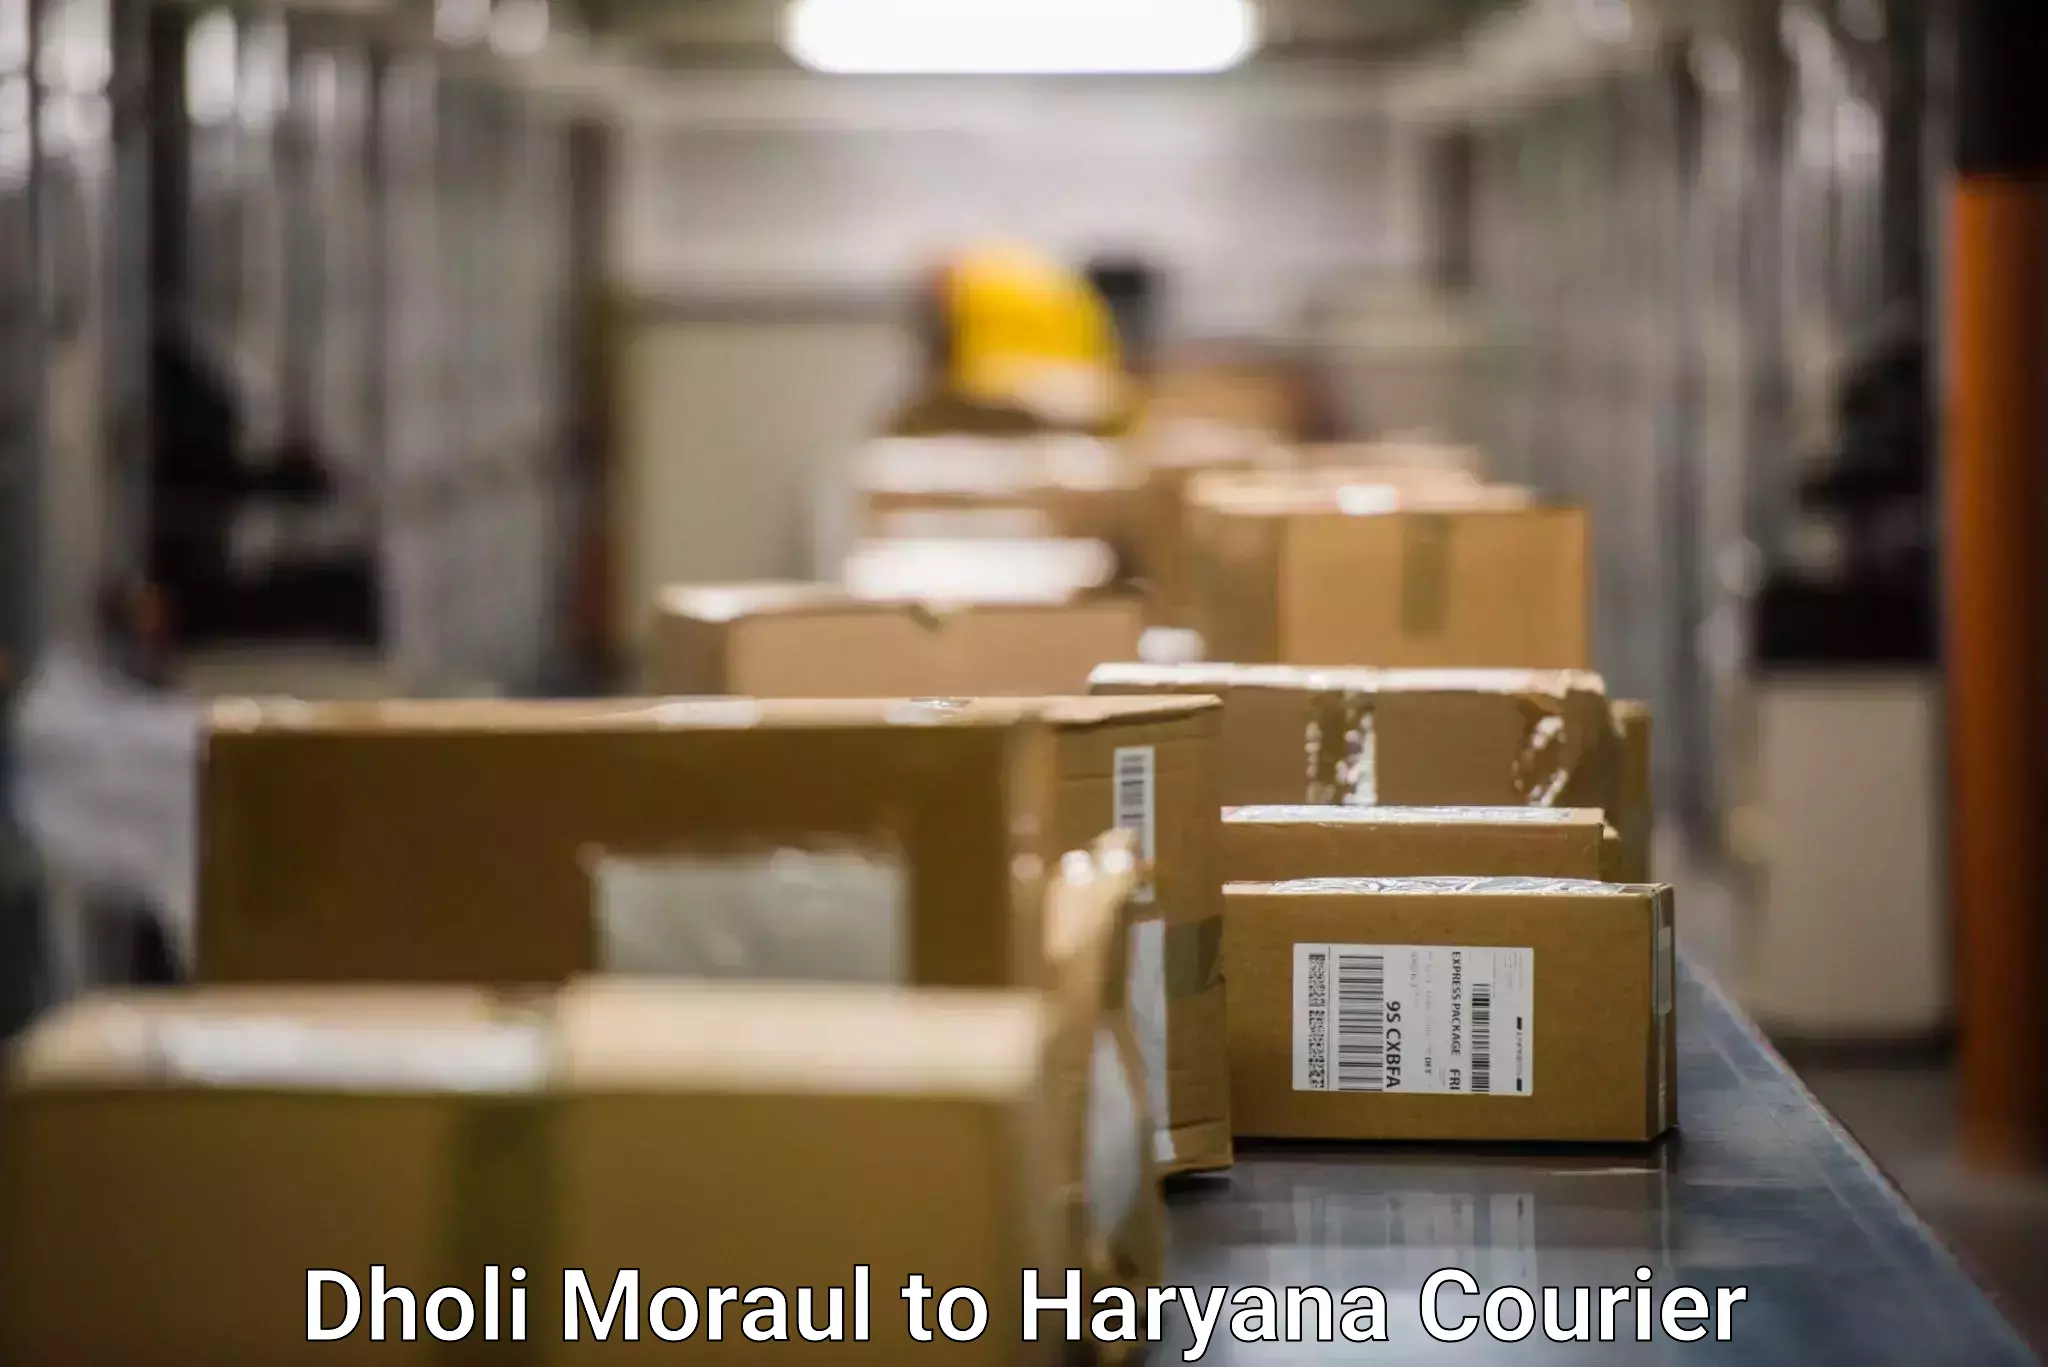 On-call courier service Dholi Moraul to Palwal